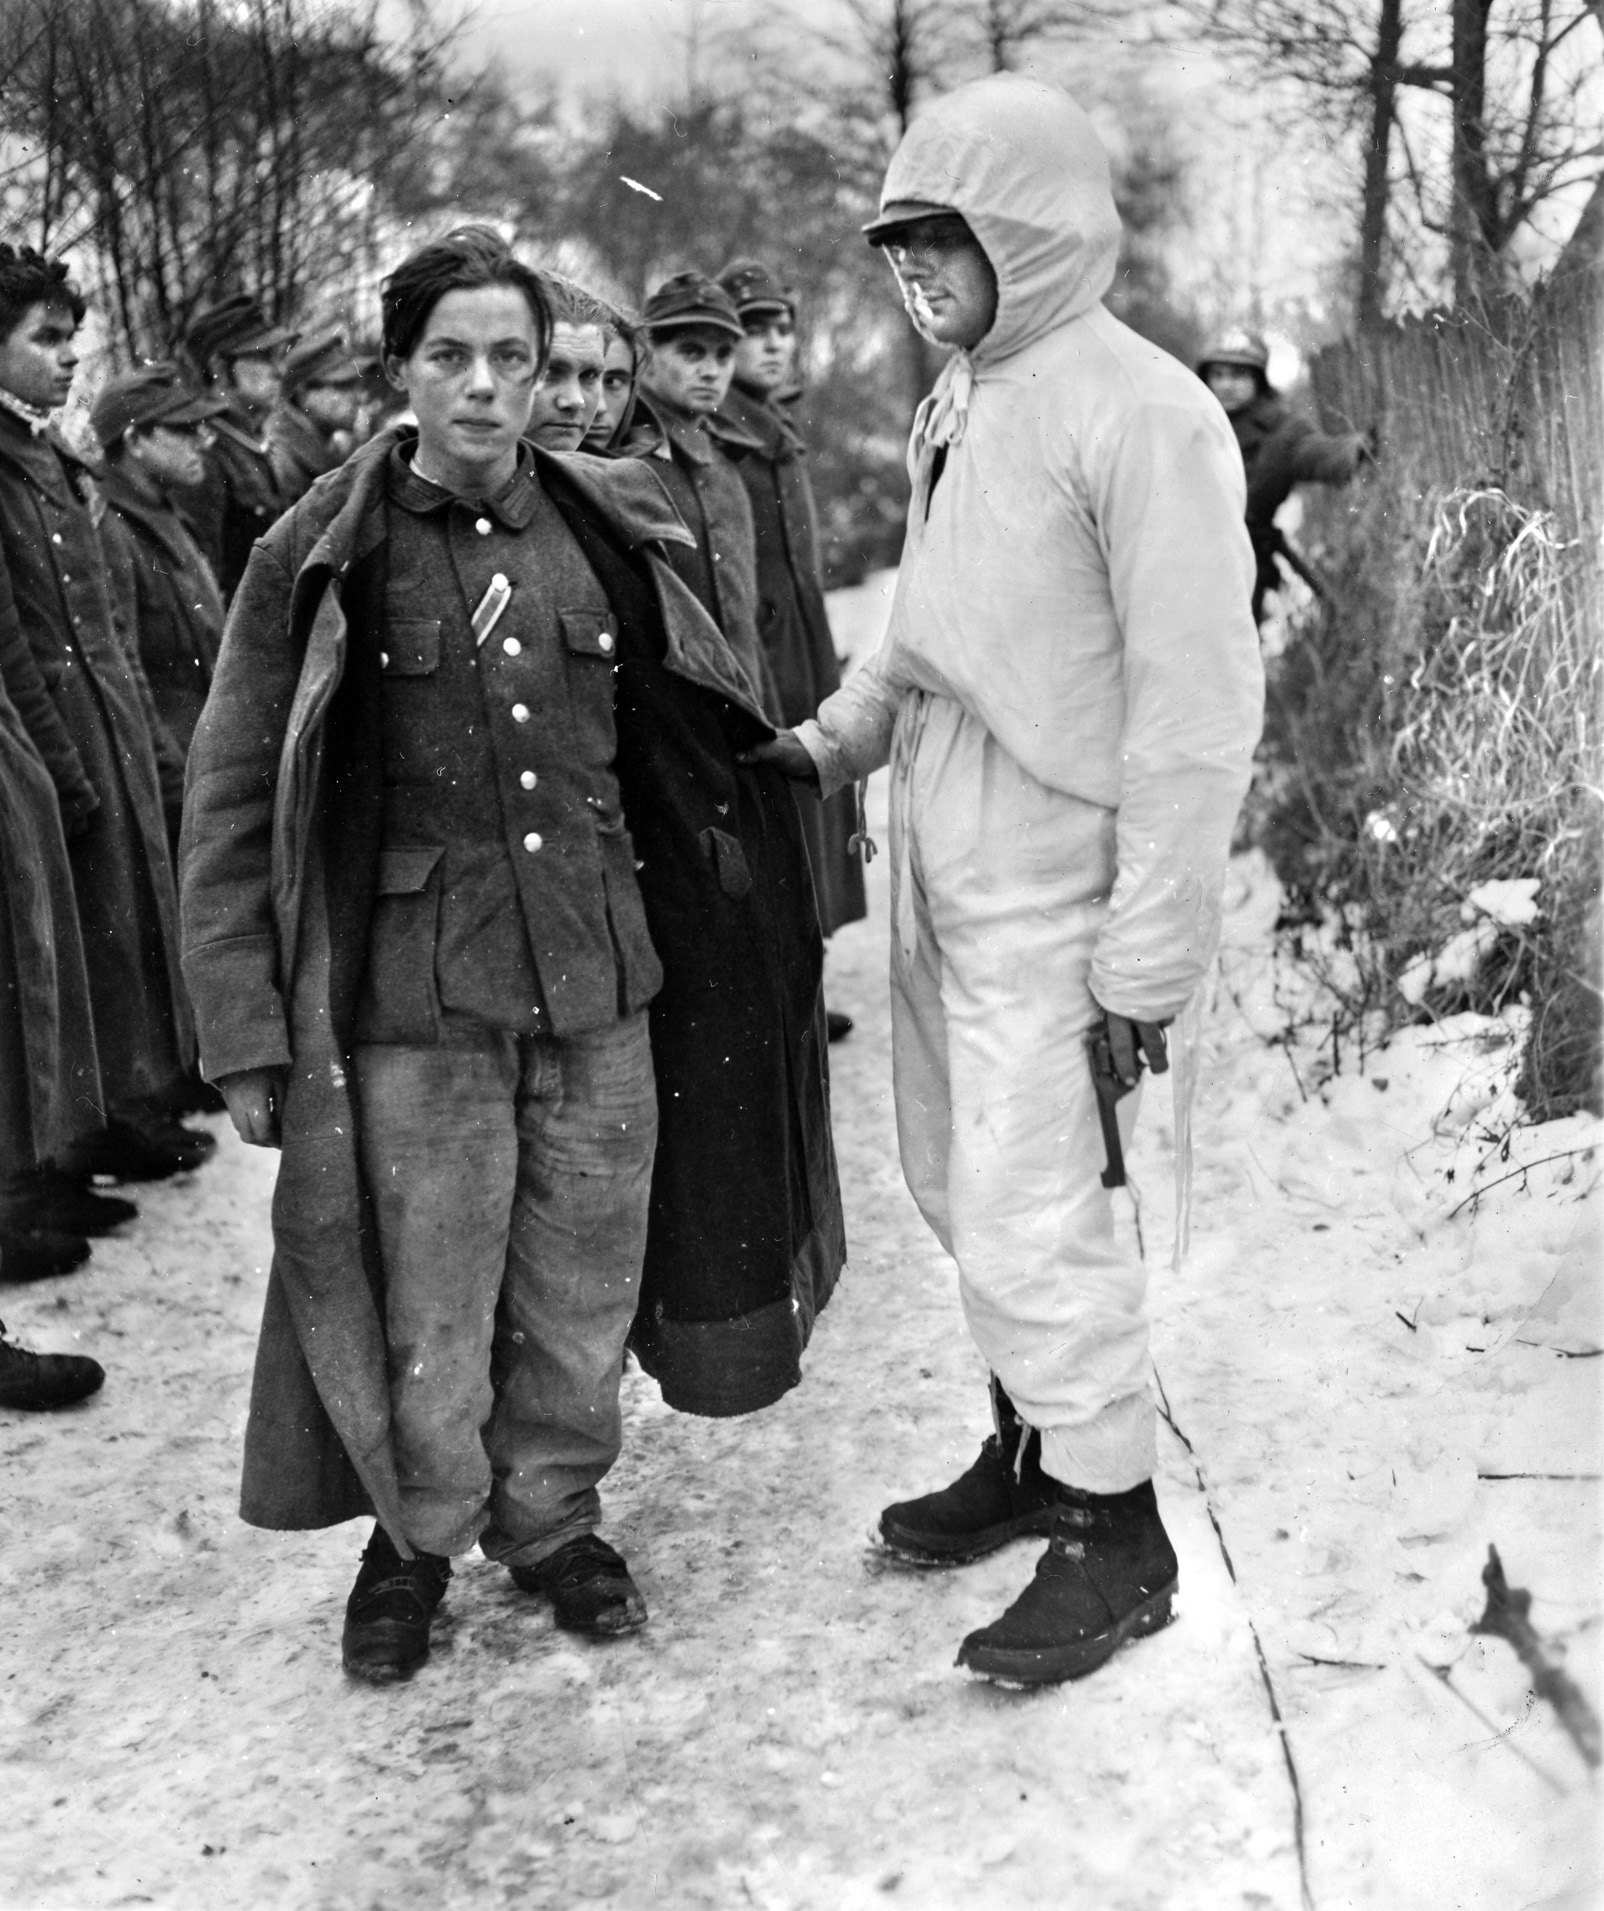 With revolver in hand, an 8th Regiment, 4th Infantry Division, soldier in a snow-camouflage suit takes charge of a group of captured German soldiers near the Sauer River. 